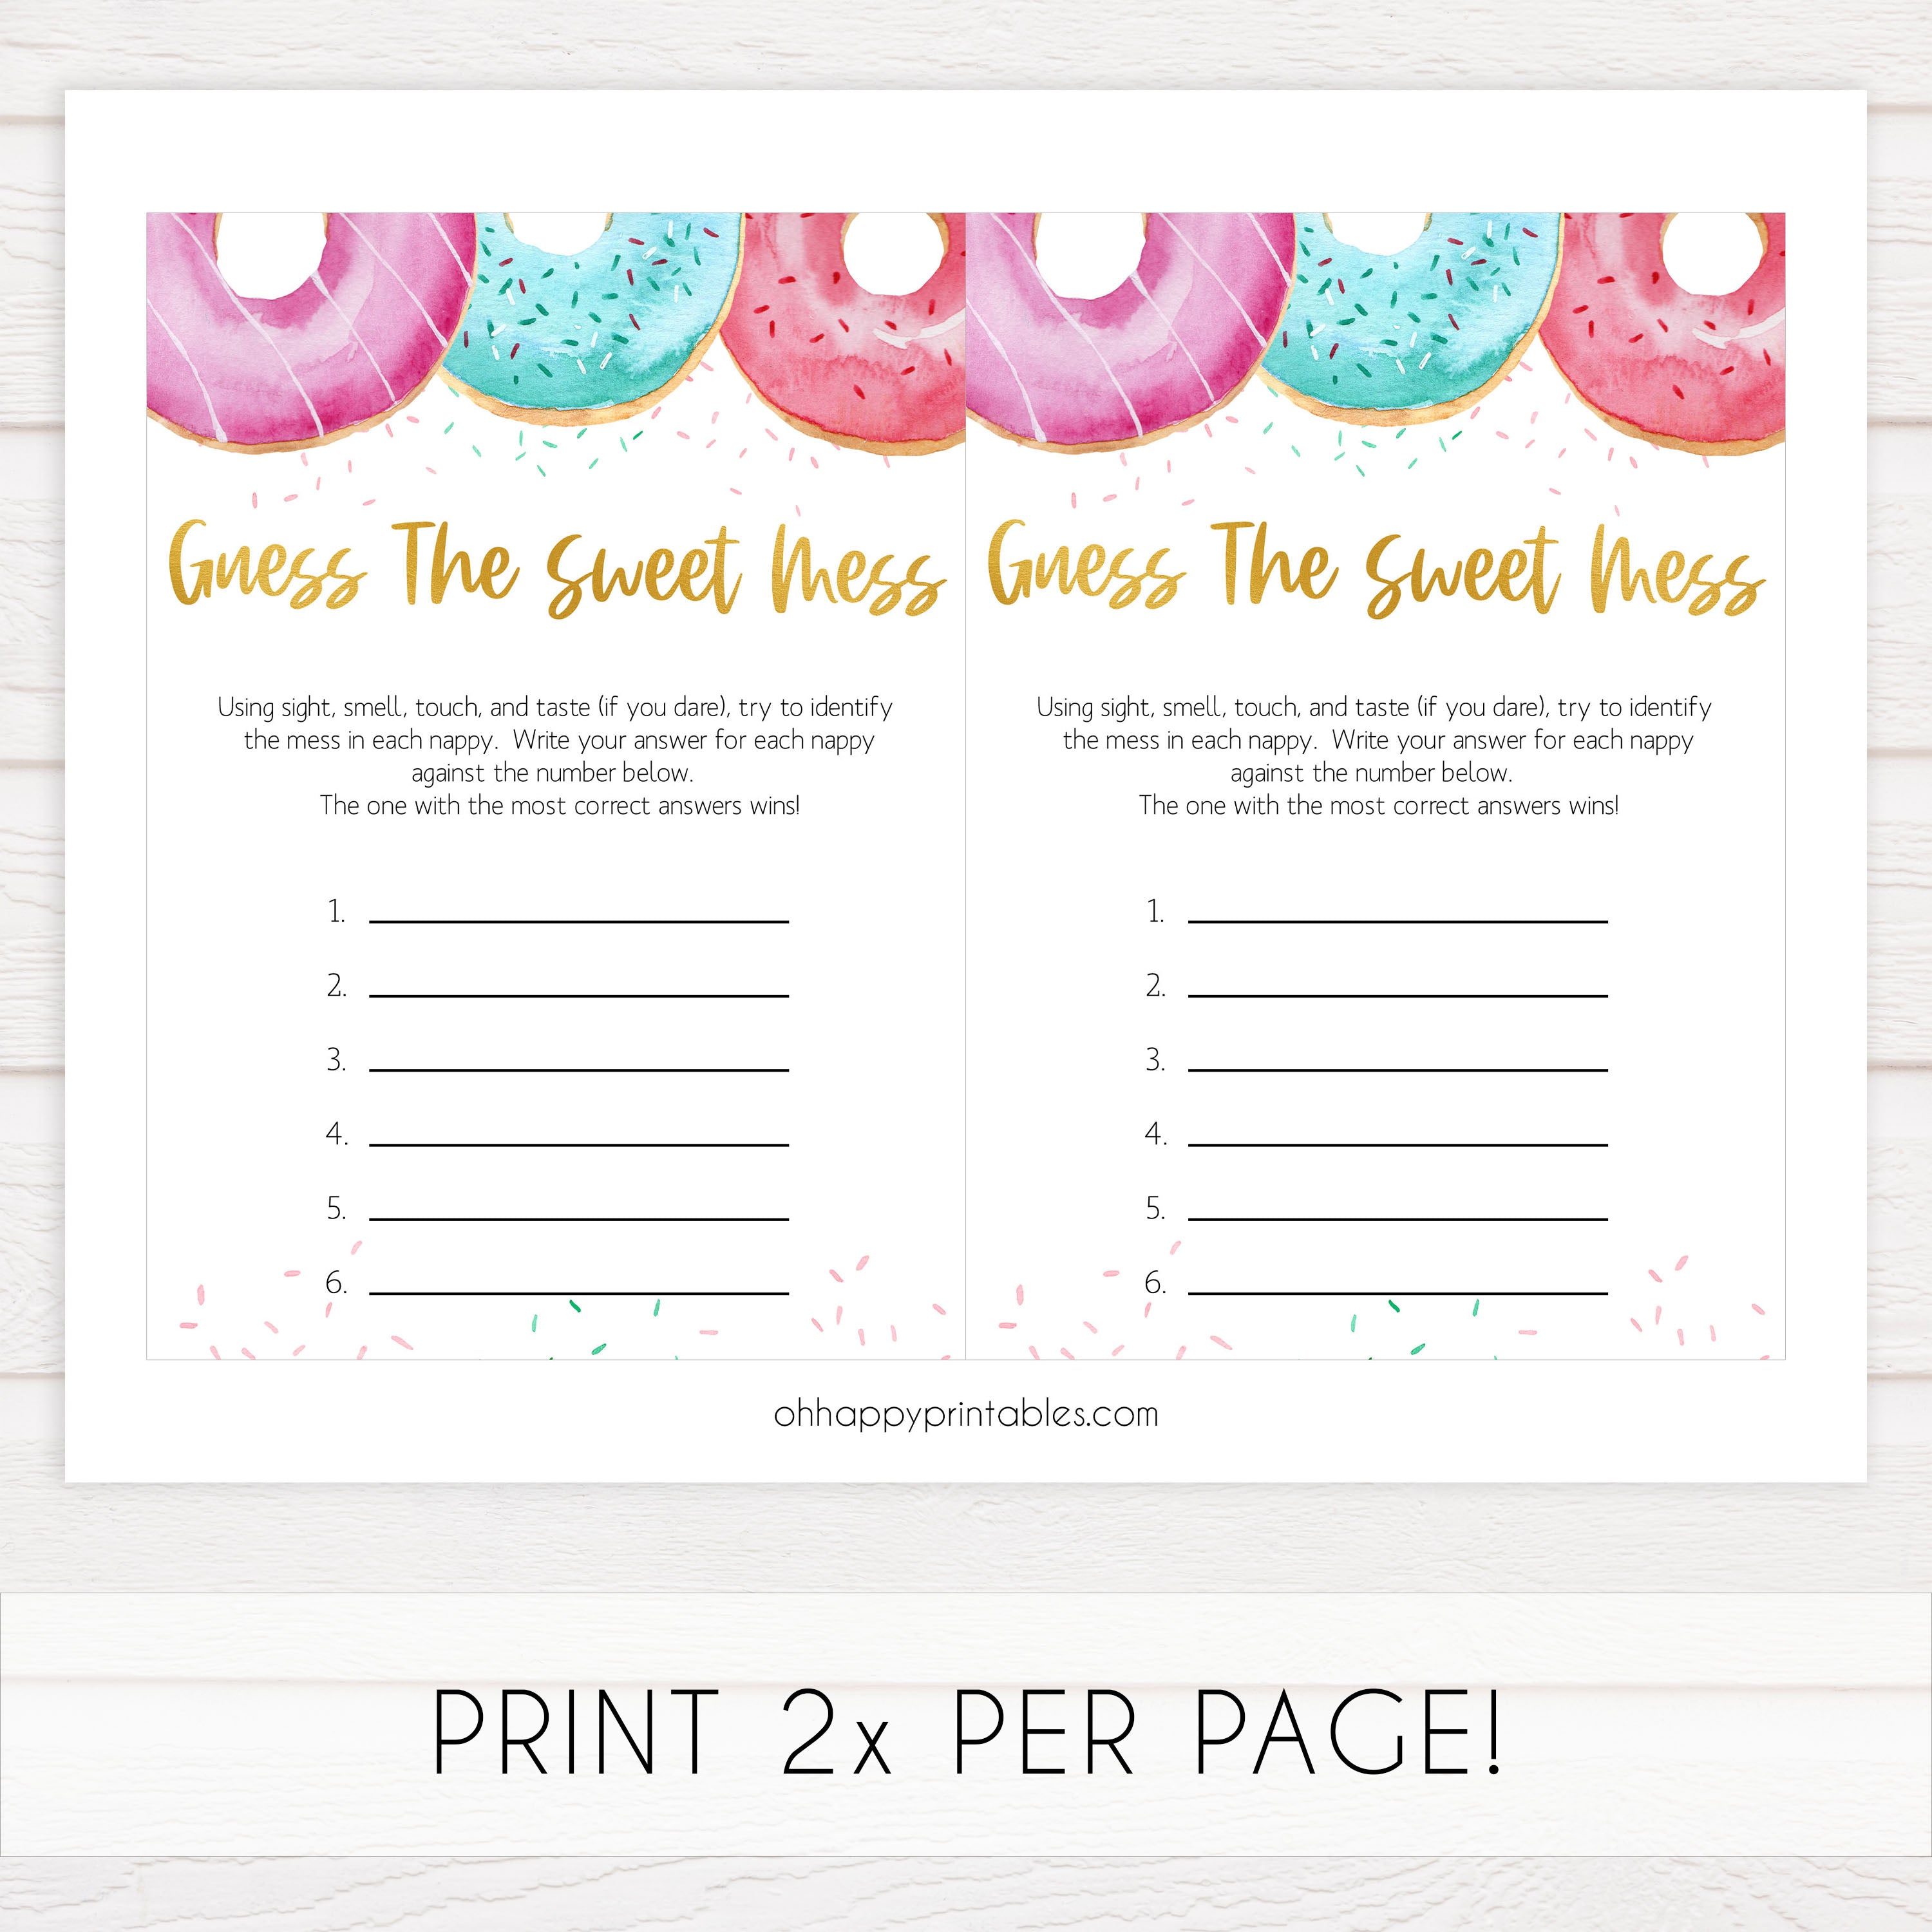 guess the sweet mess game, Printable baby shower games, donut baby games, baby shower games, fun baby shower ideas, top baby shower ideas, donut sprinkles baby shower, baby shower games, fun donut baby shower ideas